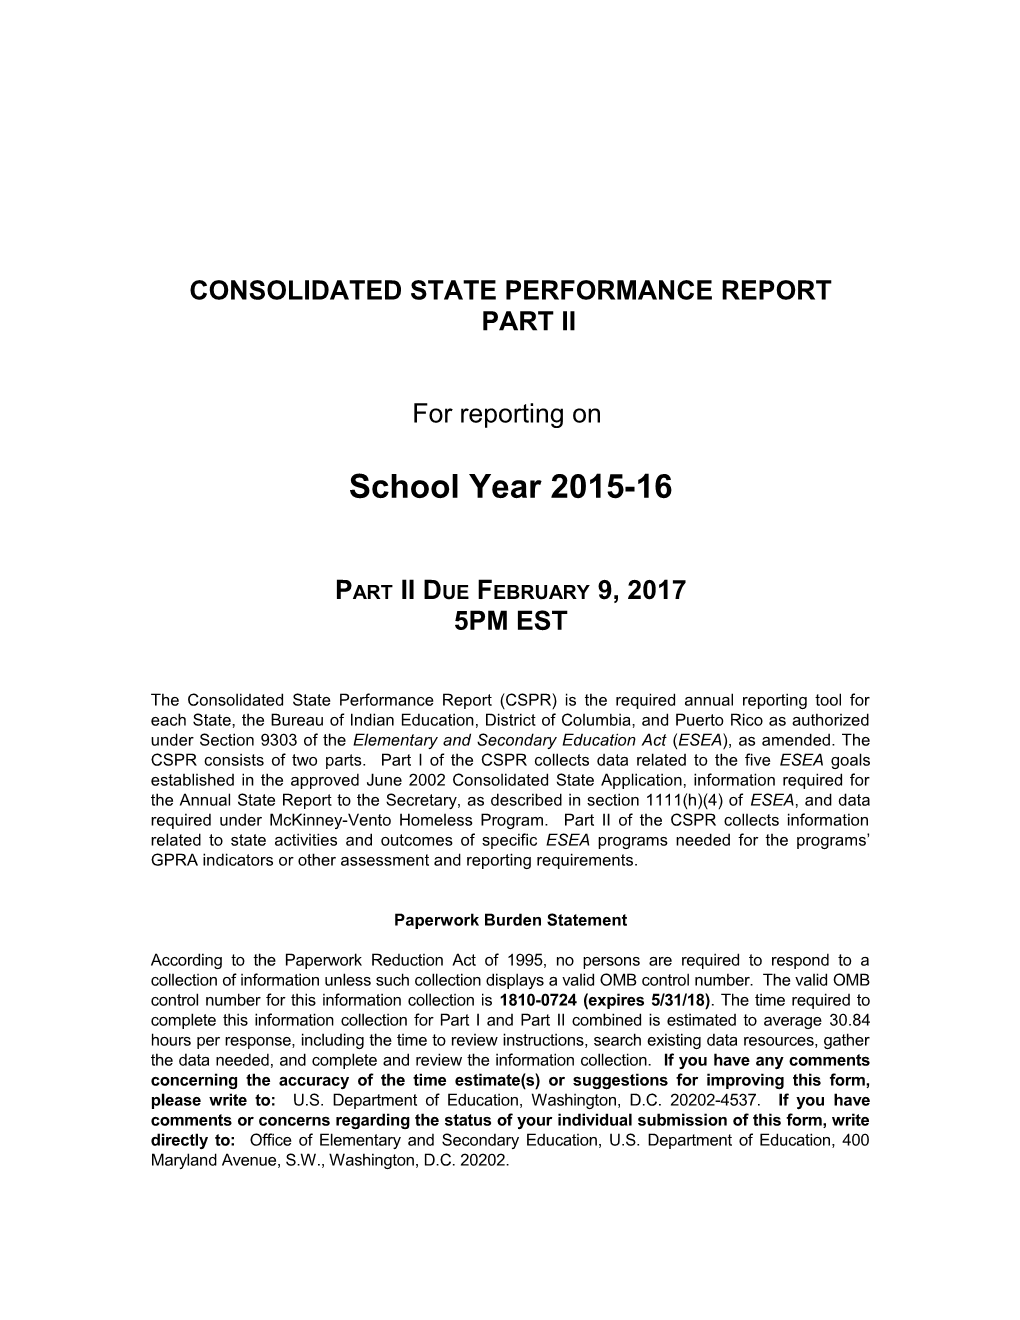 Consolidated State Performance Report: Part II for Reporting on School Year 2015-16 (Msword)